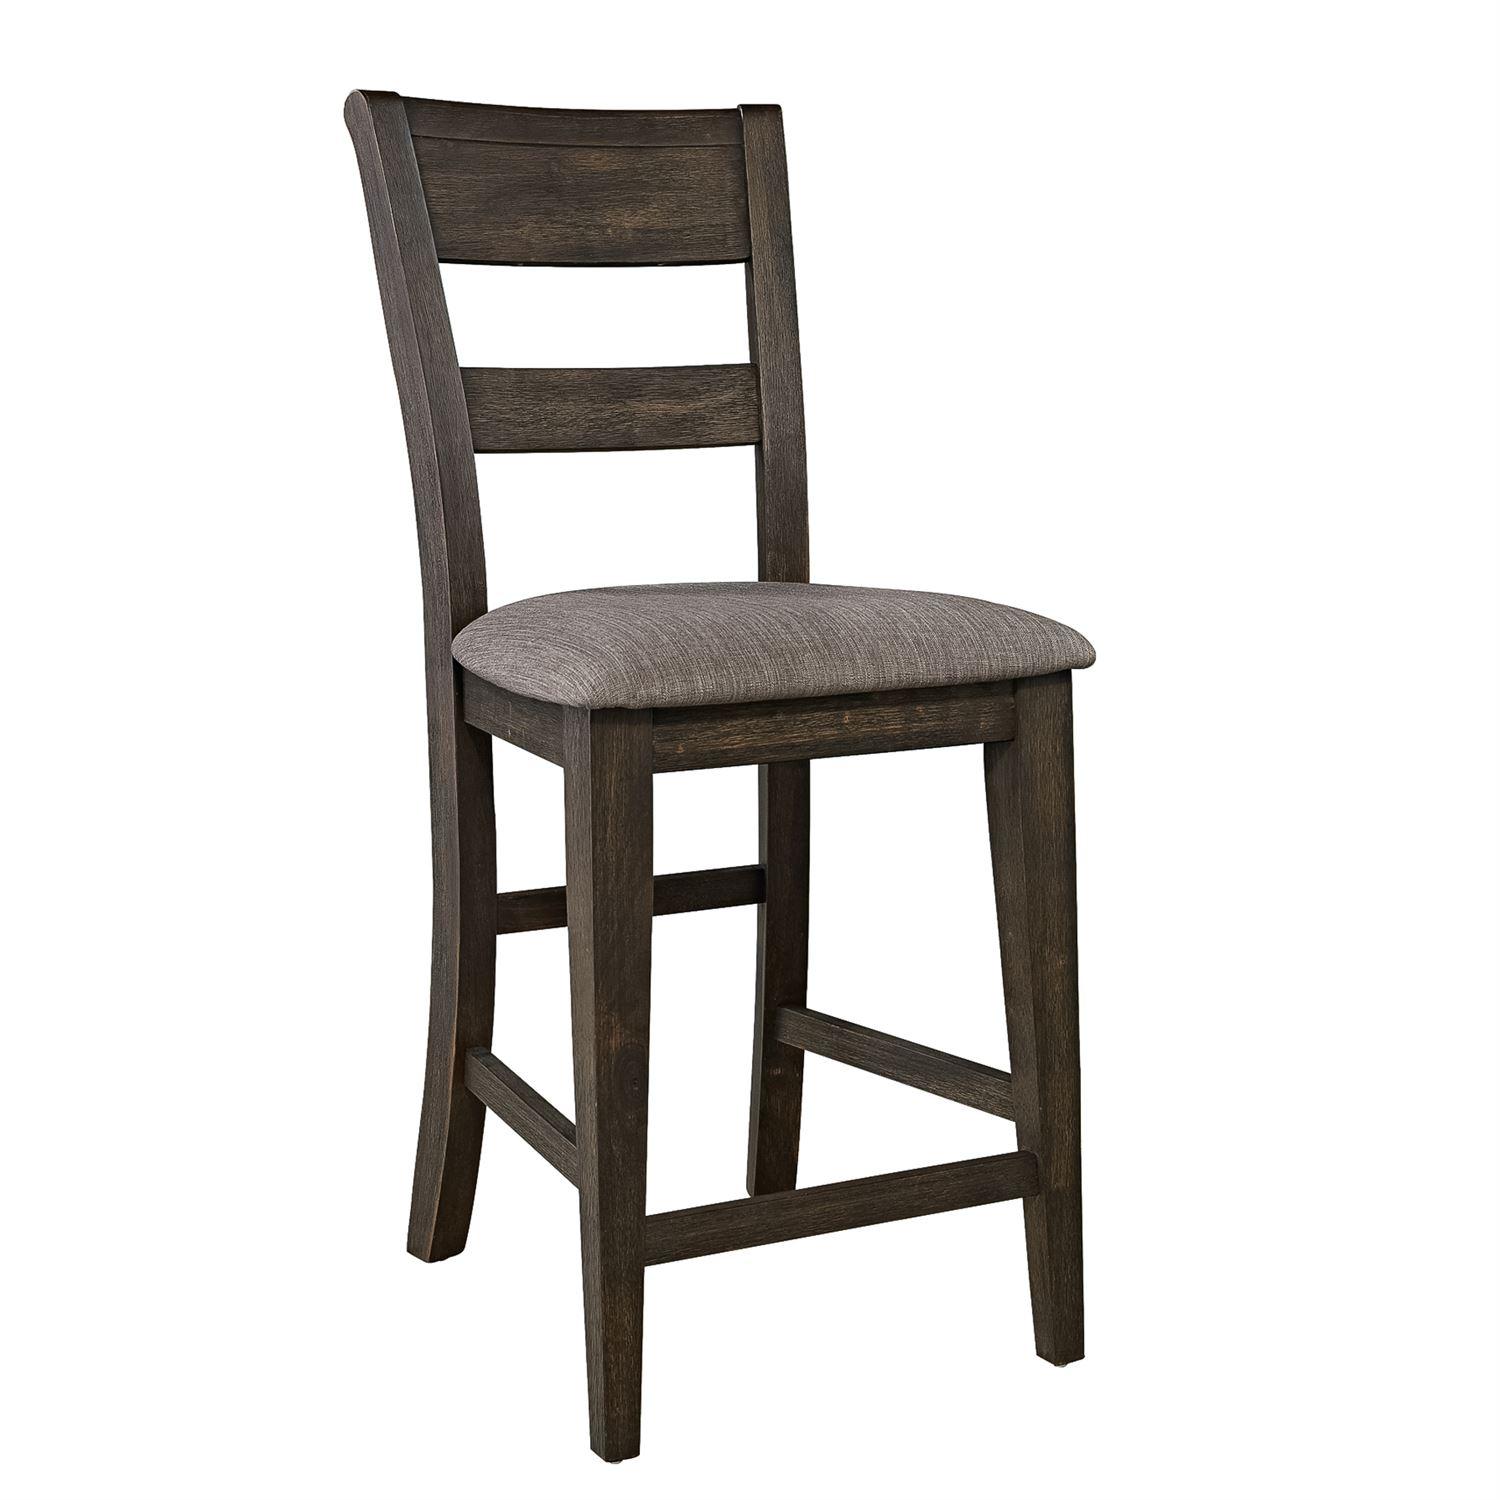 Rustic Counter Chair Double Bridge  (152-CD) Counter Chair 152-B250124-2PC in Chestnut Fabric